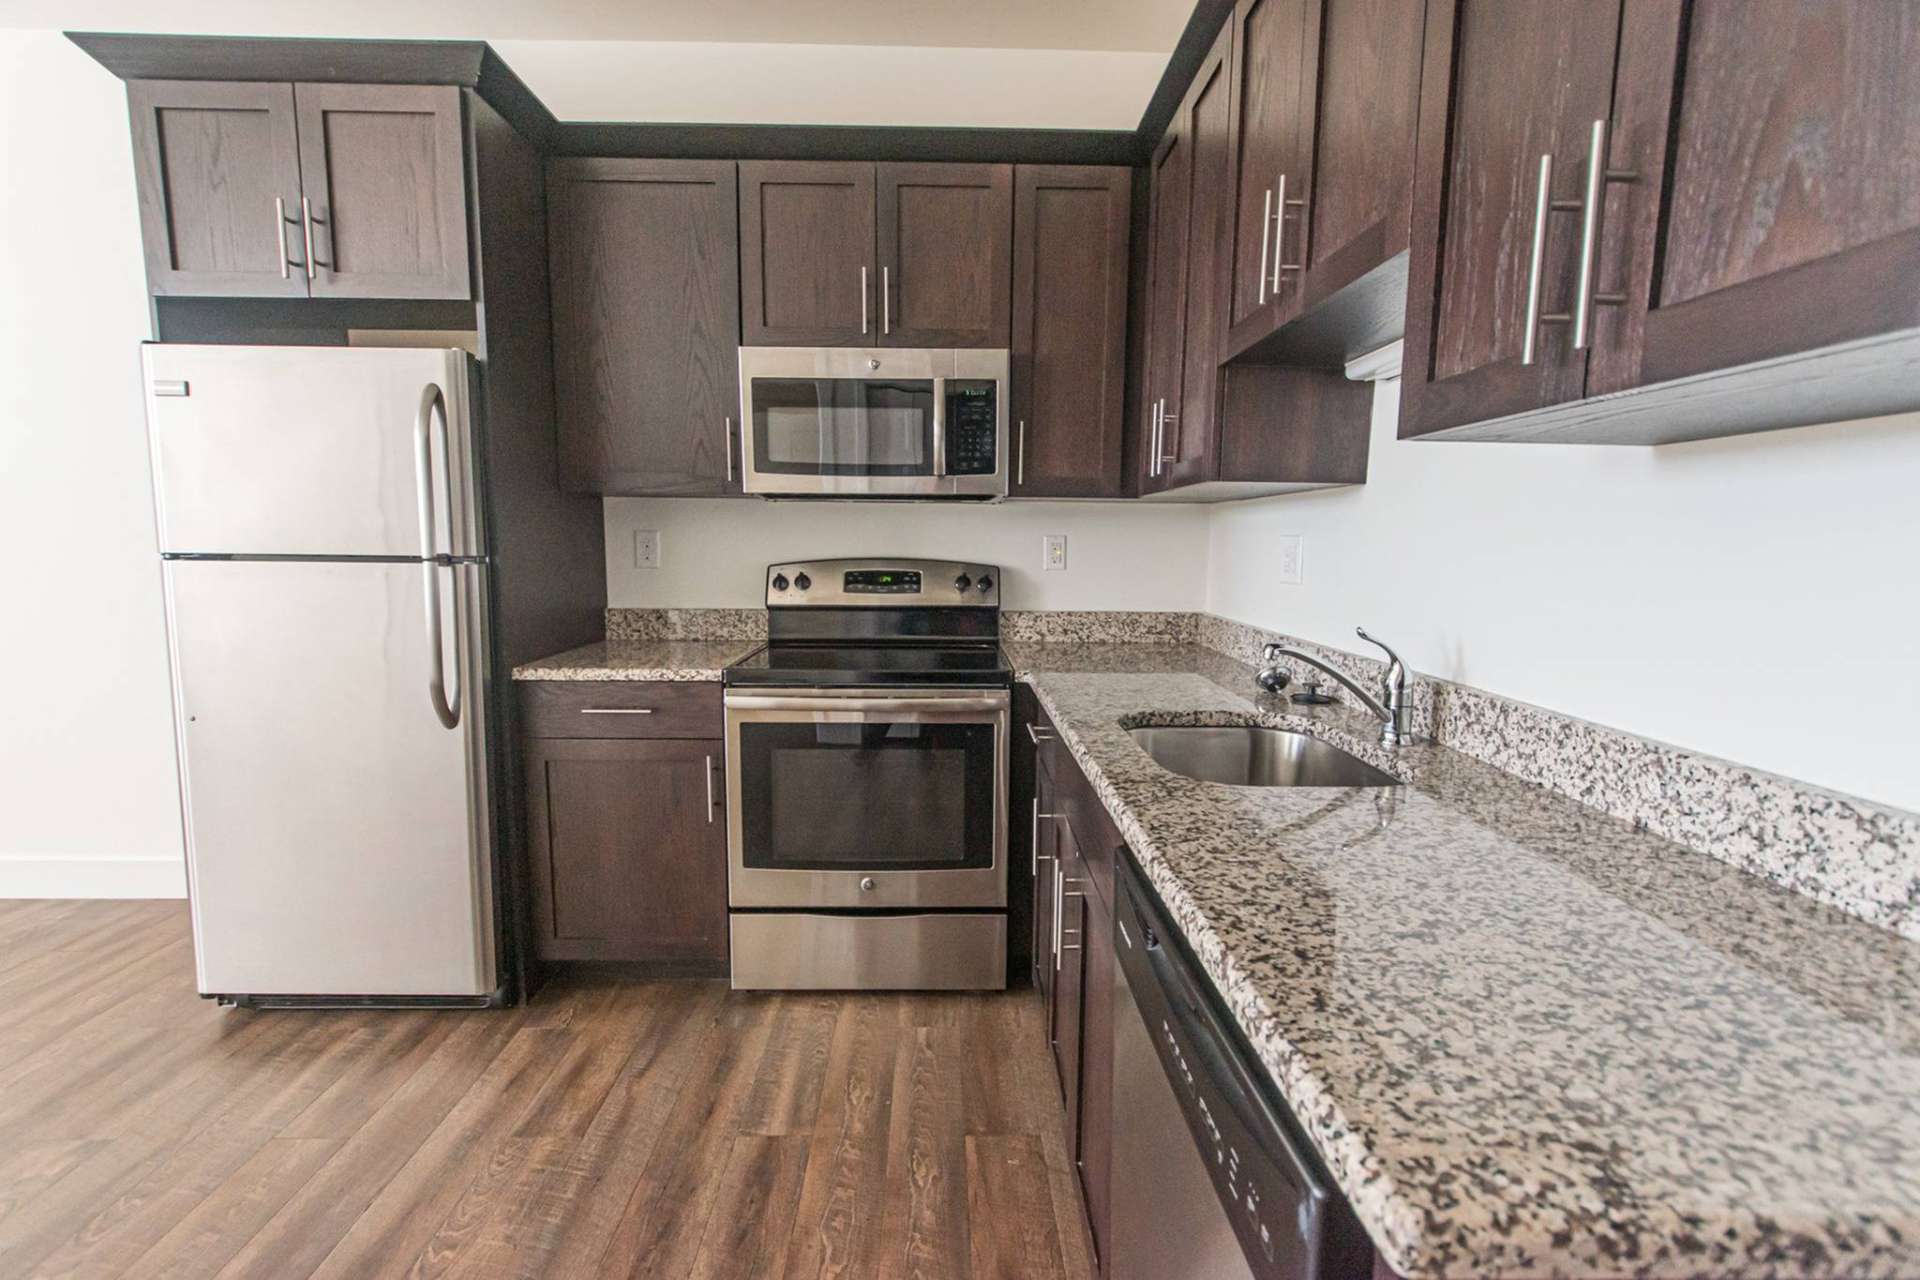 Kitchen with marbled countertops and stainless steel appliances at Magnolia Place Apartments.